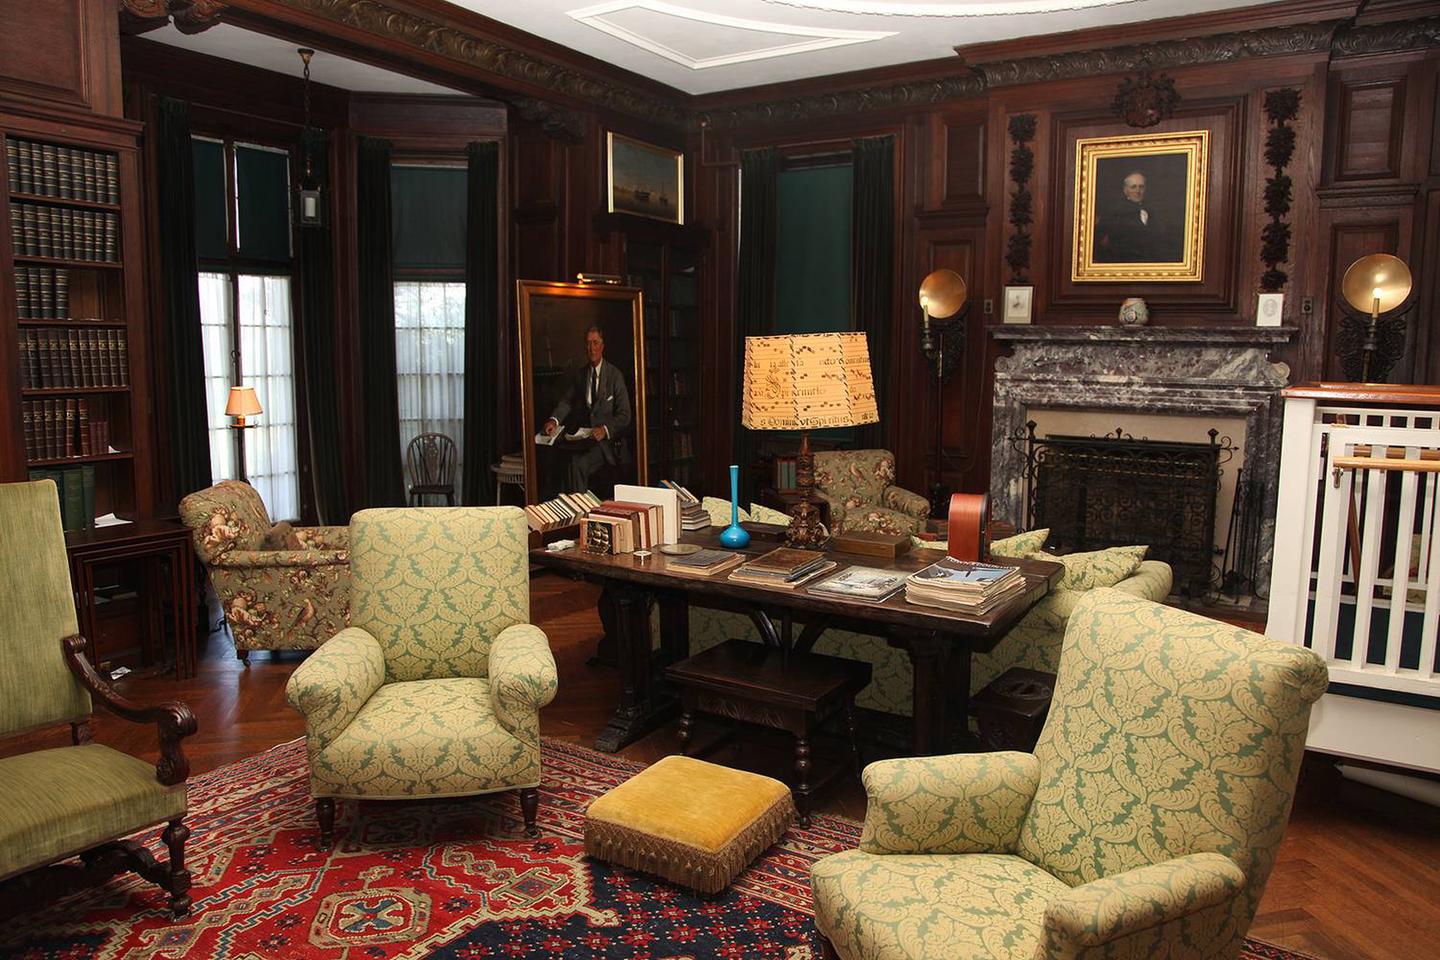 FDR's home library